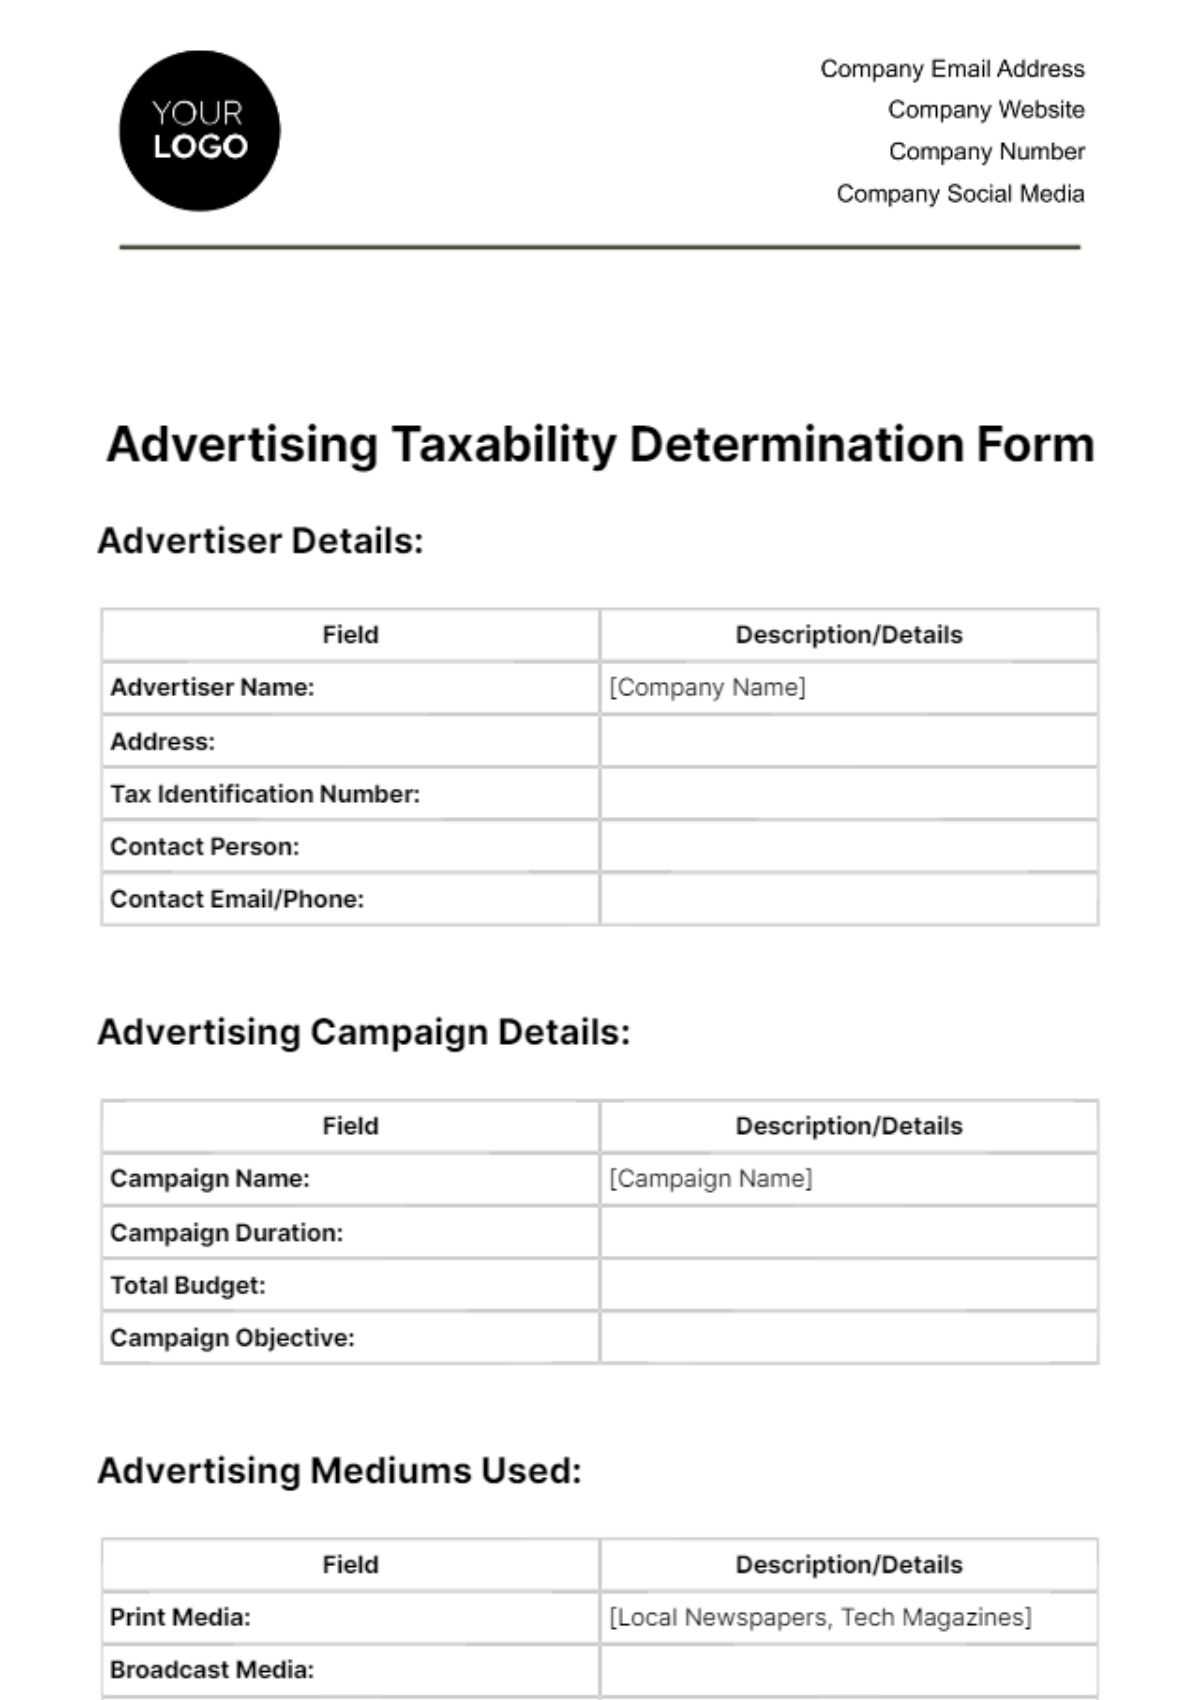 Advertising Taxability Determination Form Template